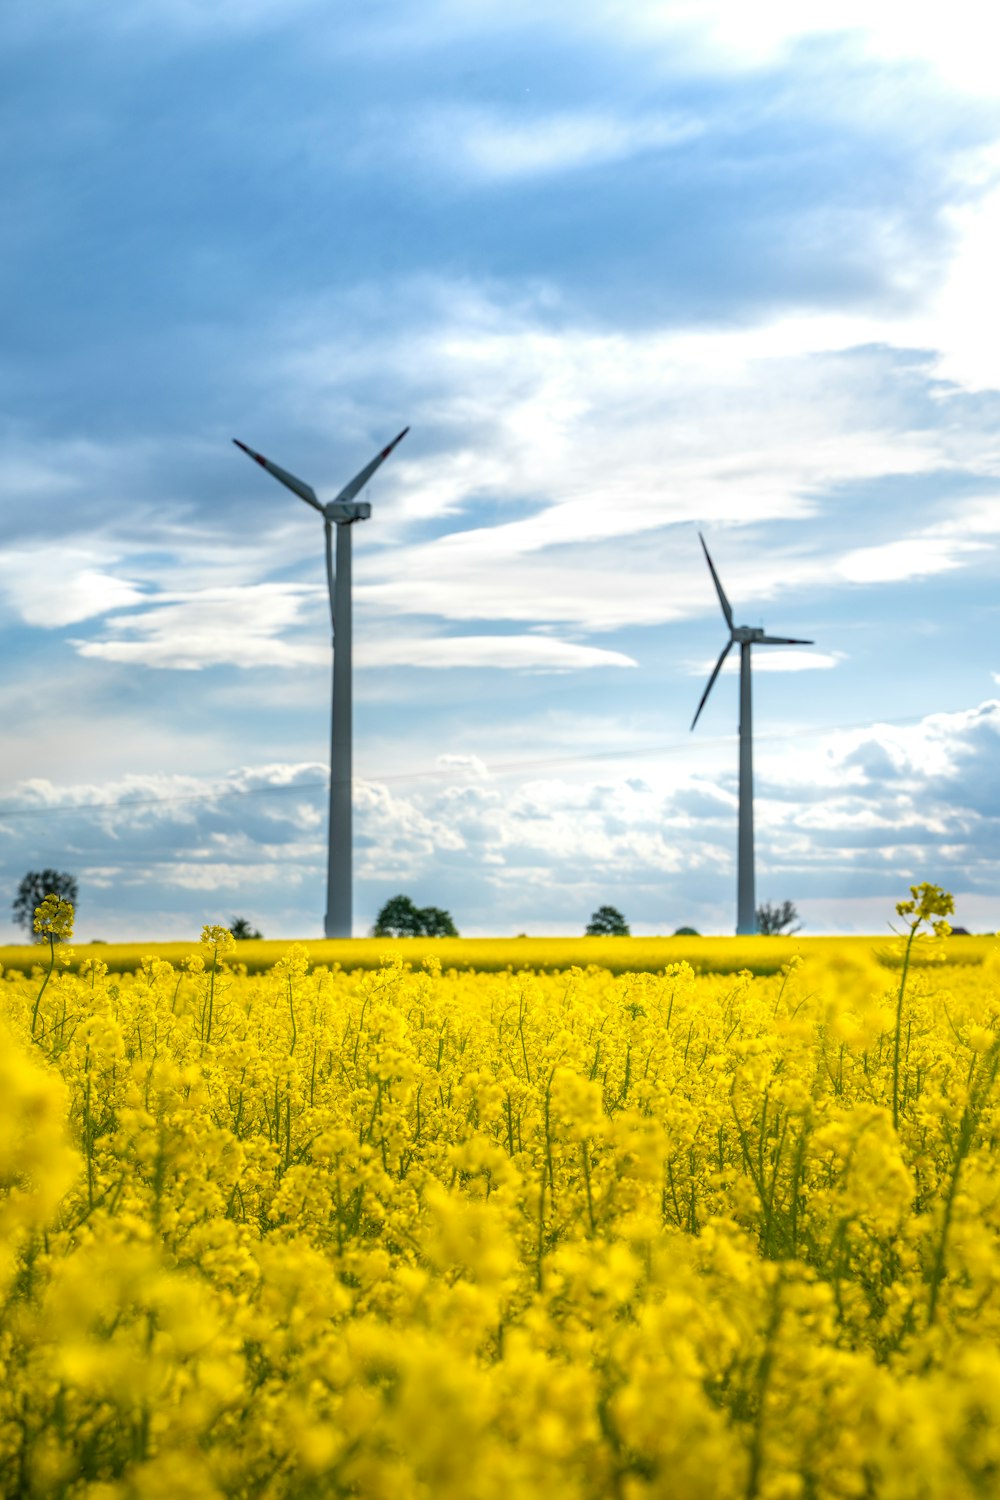 wind turbines on yellow flower field under white clouds and blue sky during daytime